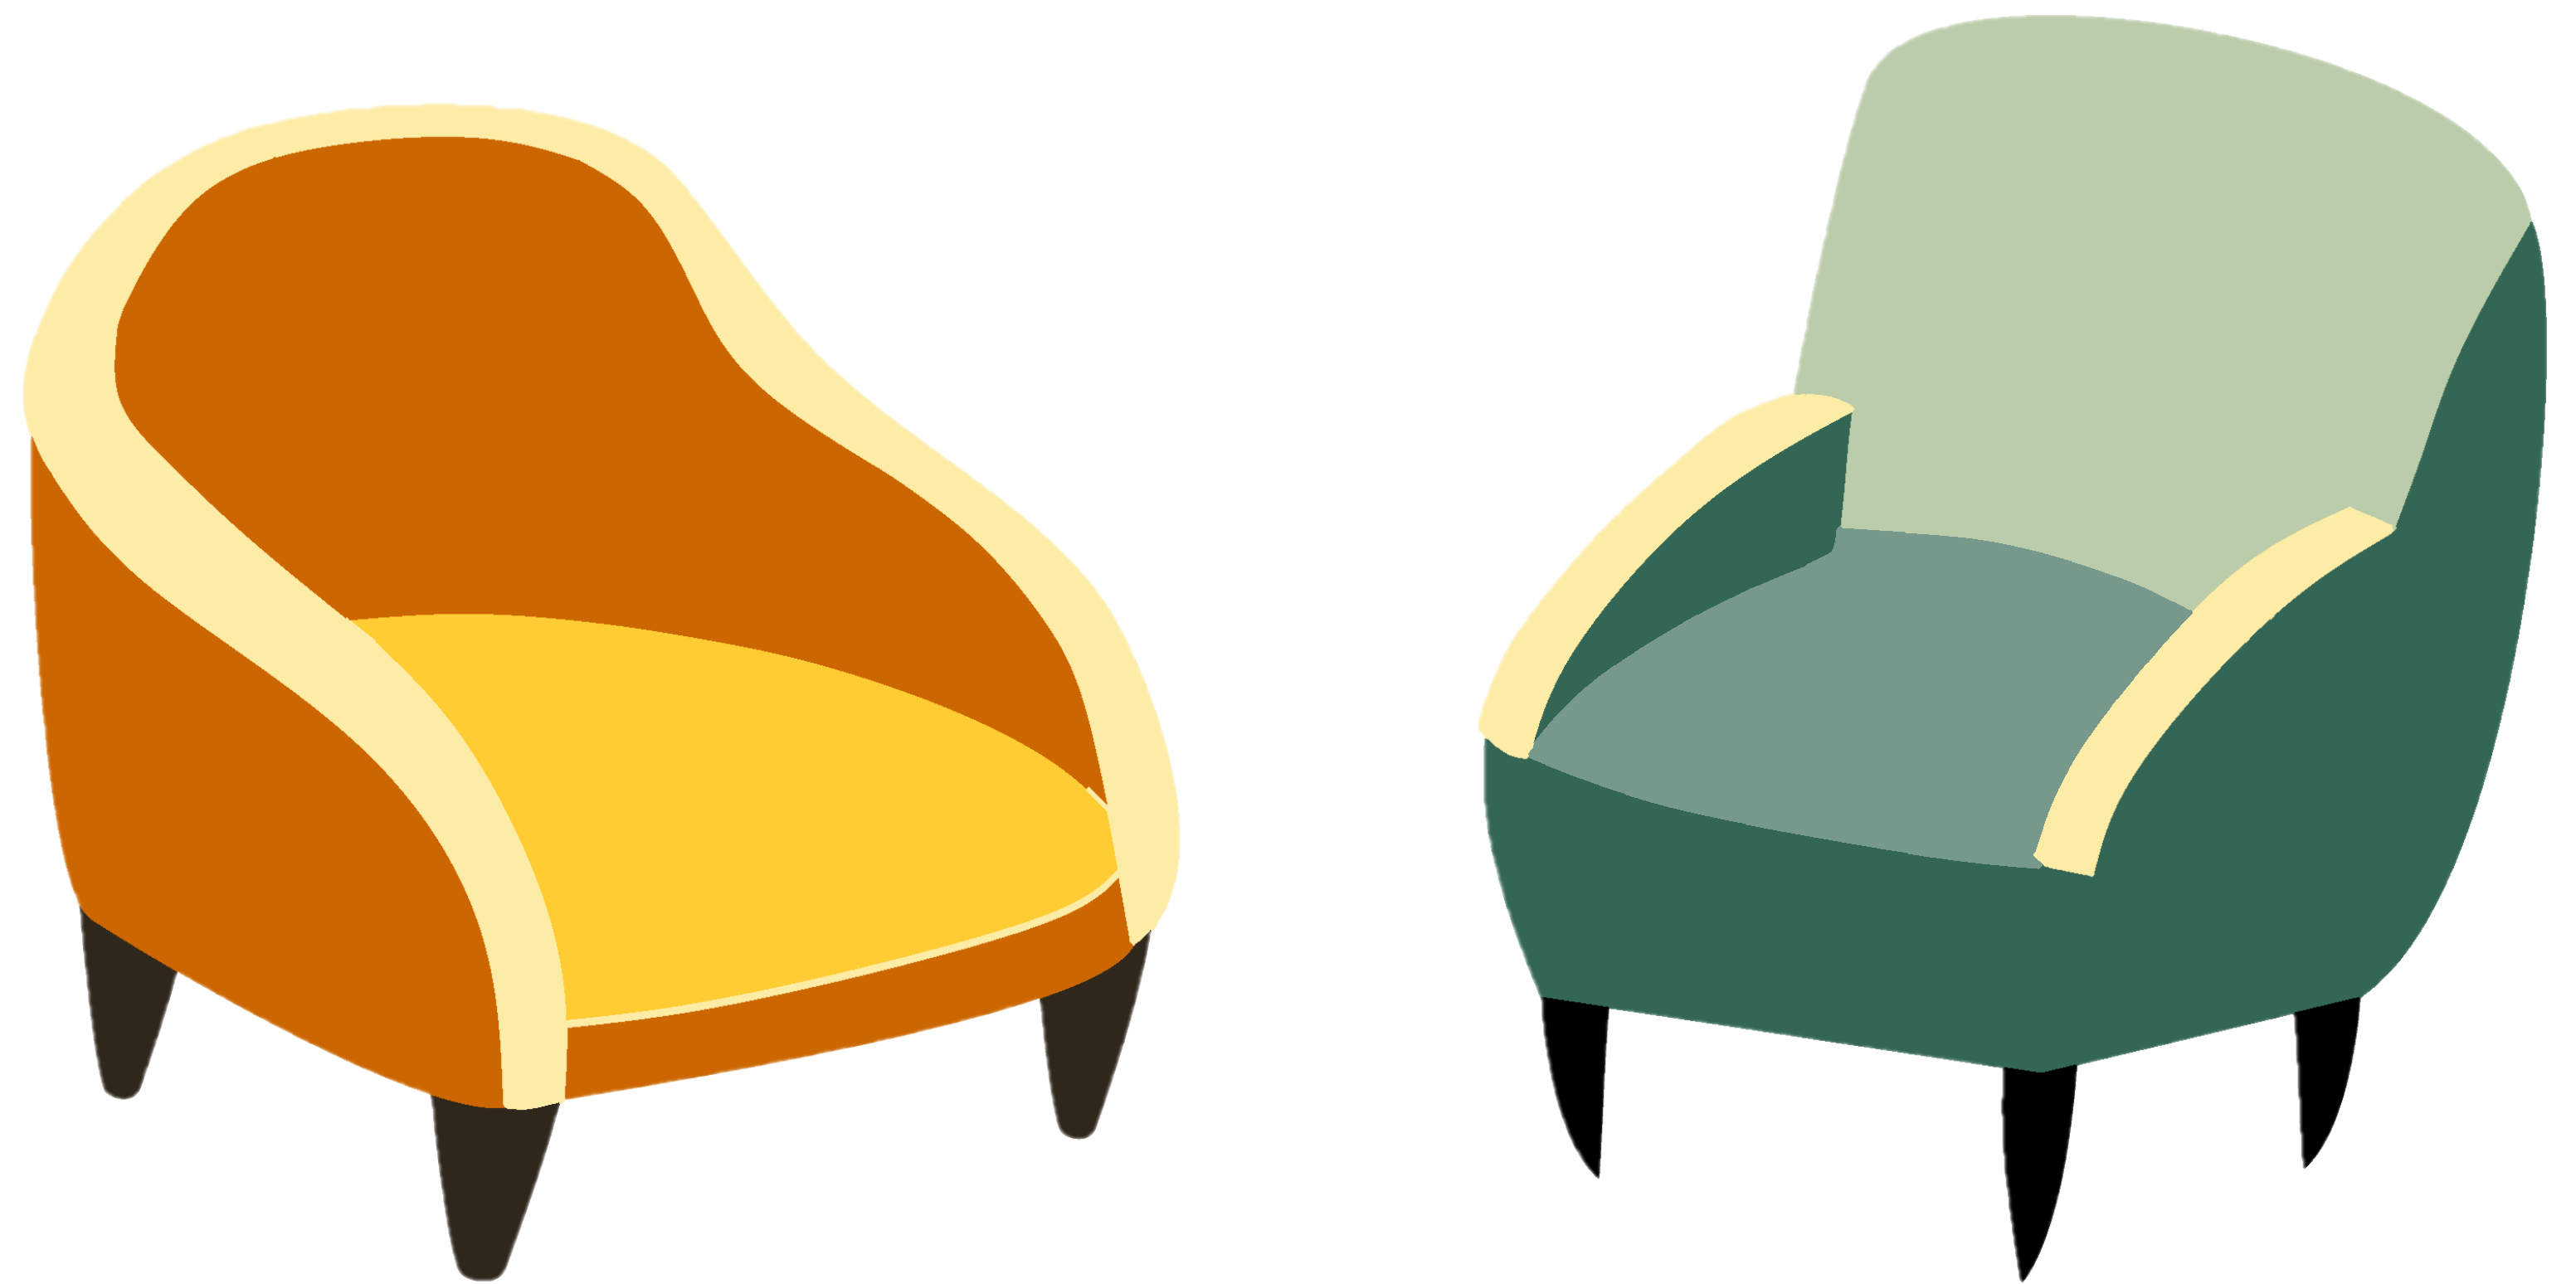 Two cartoon armchairs facing each other, one yellow and the other green.